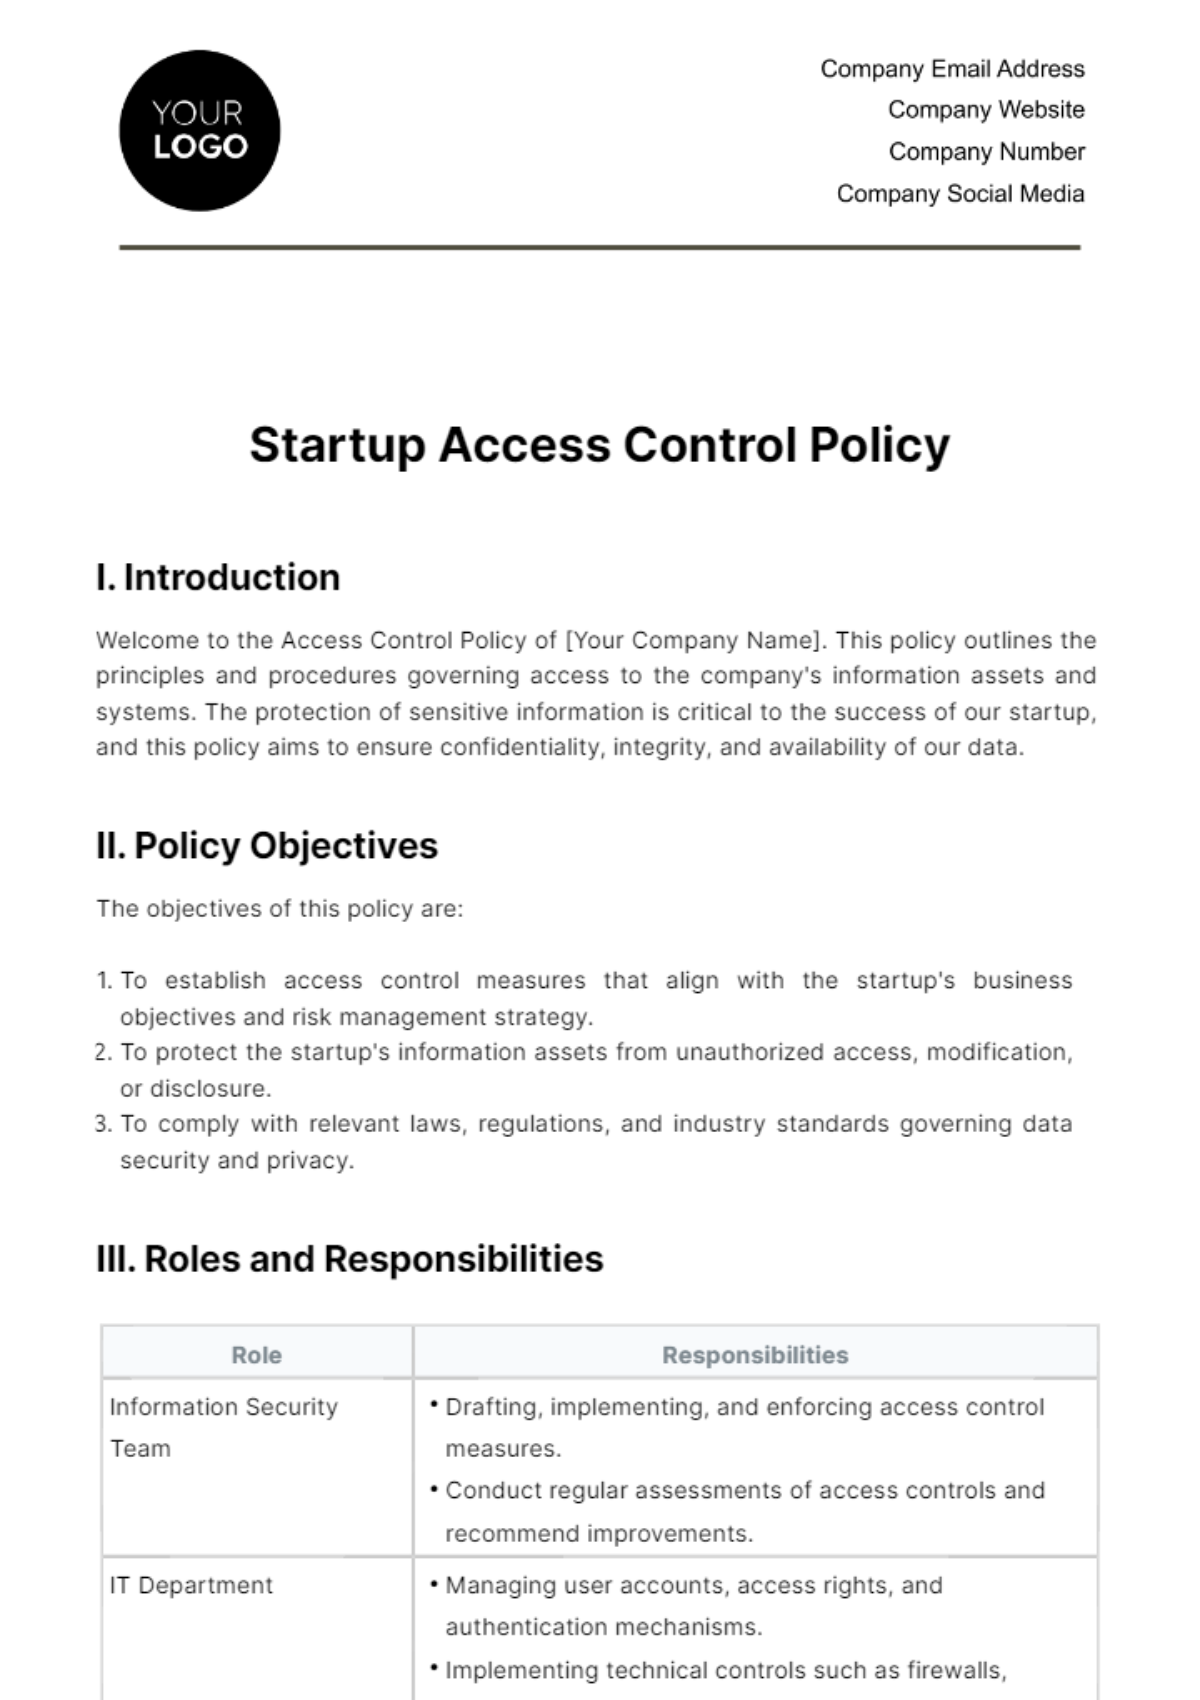 Startup Access Control Policy Template